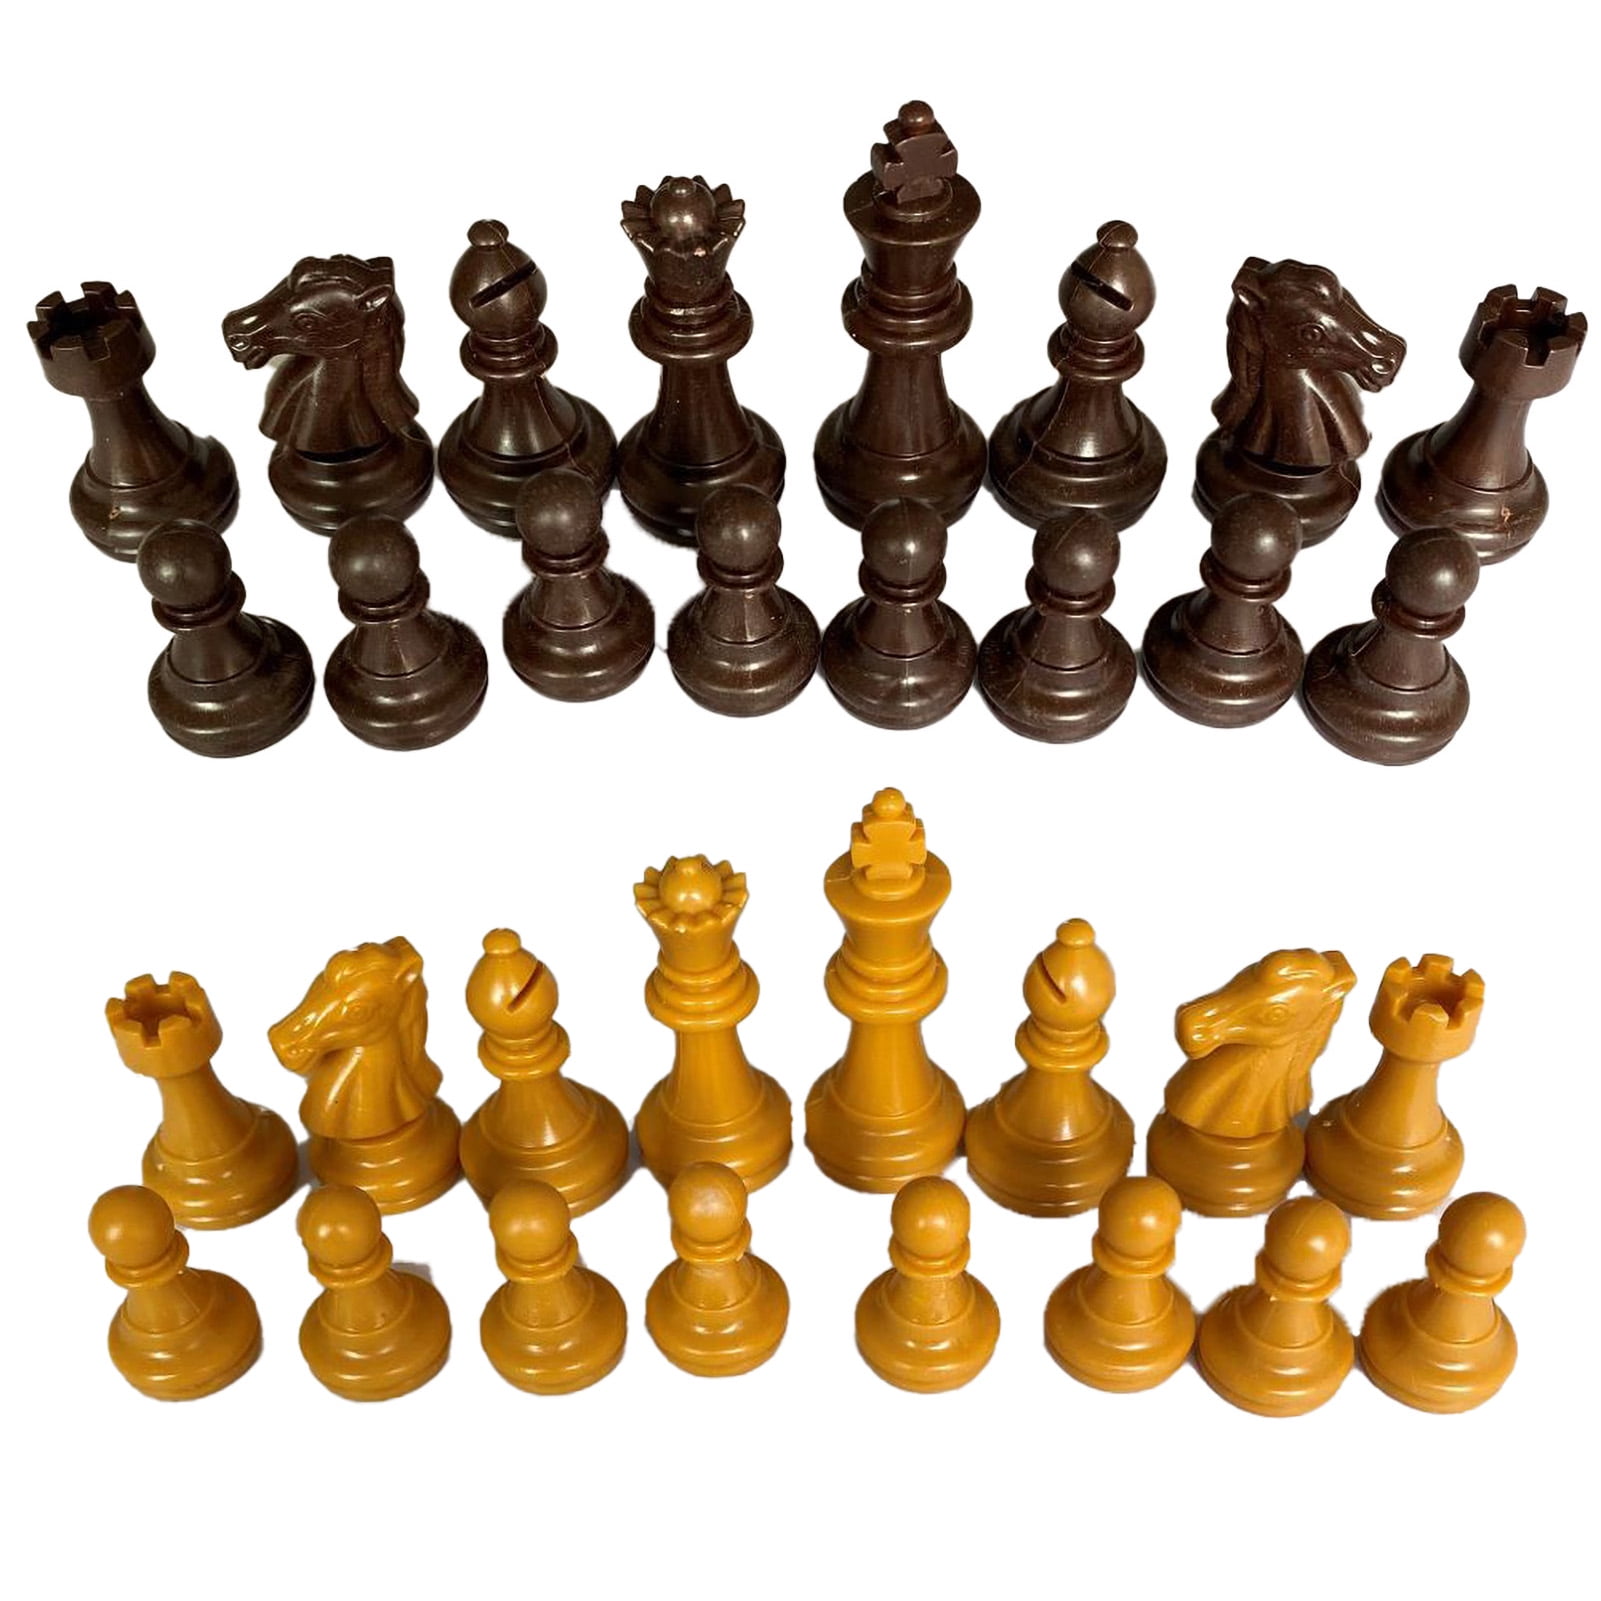 32Pcs 9cm Large Wooden Hand Crafted Chess Pieces Quality Game Toy Gift Set 